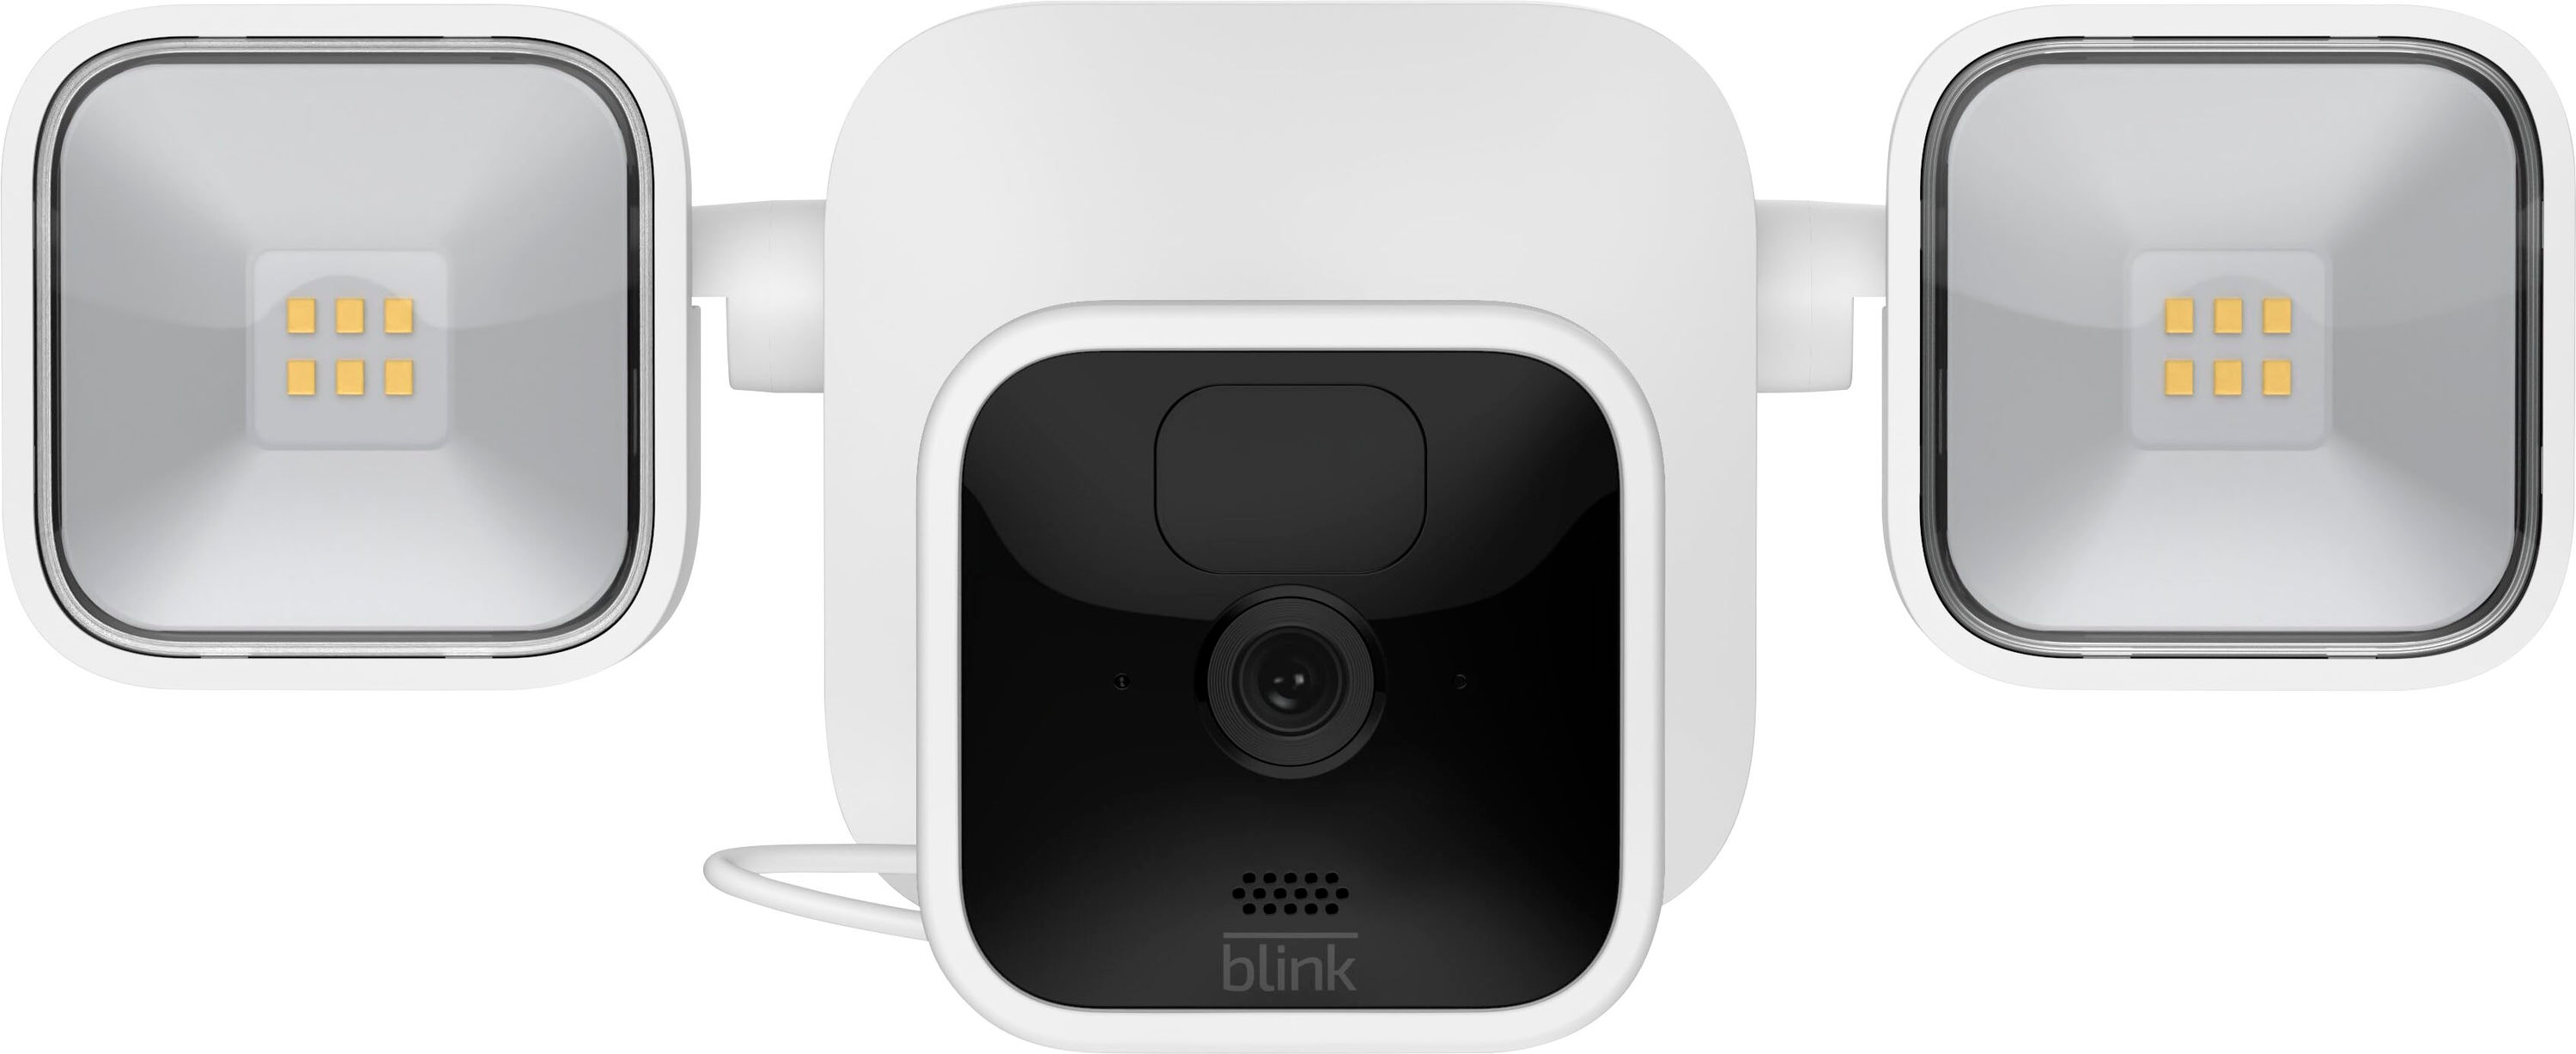 Blink Outdoor Wireless Camera Plus Floodlight - White in the